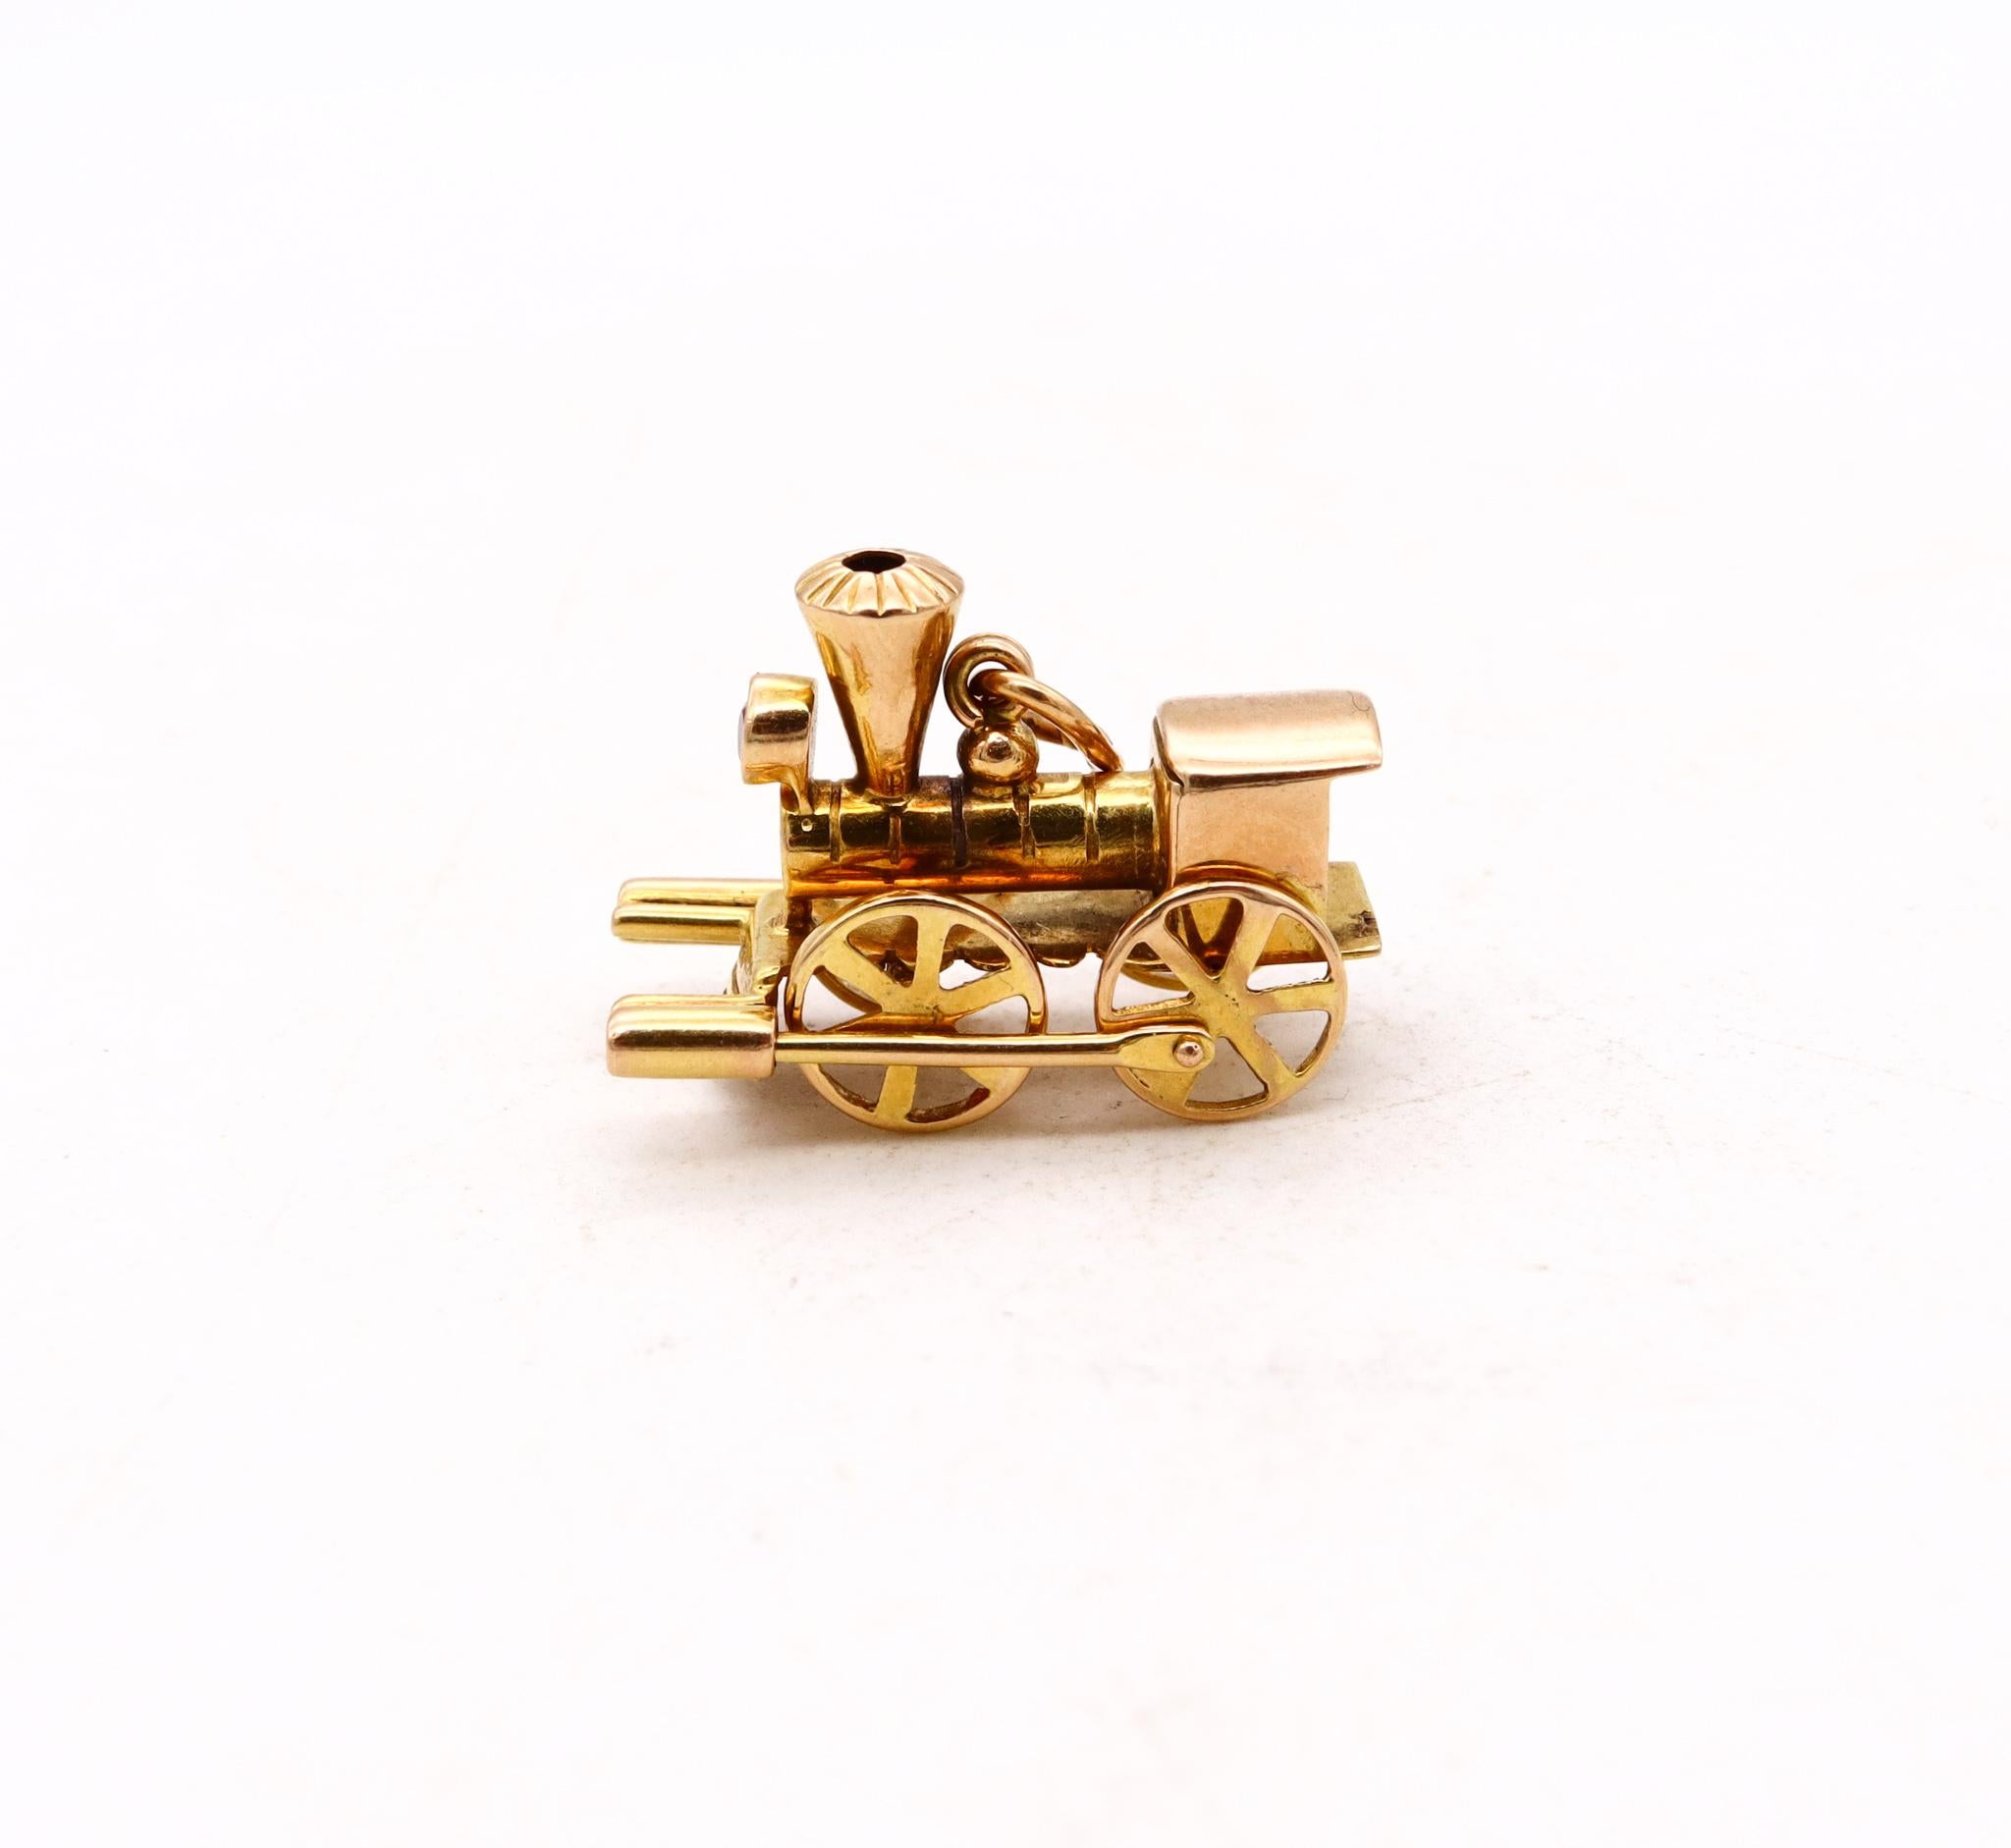 Brilliant Cut Locomotive Train Charm with Movable Mechanical Parts in Solid 18kt Gold and Ruby For Sale